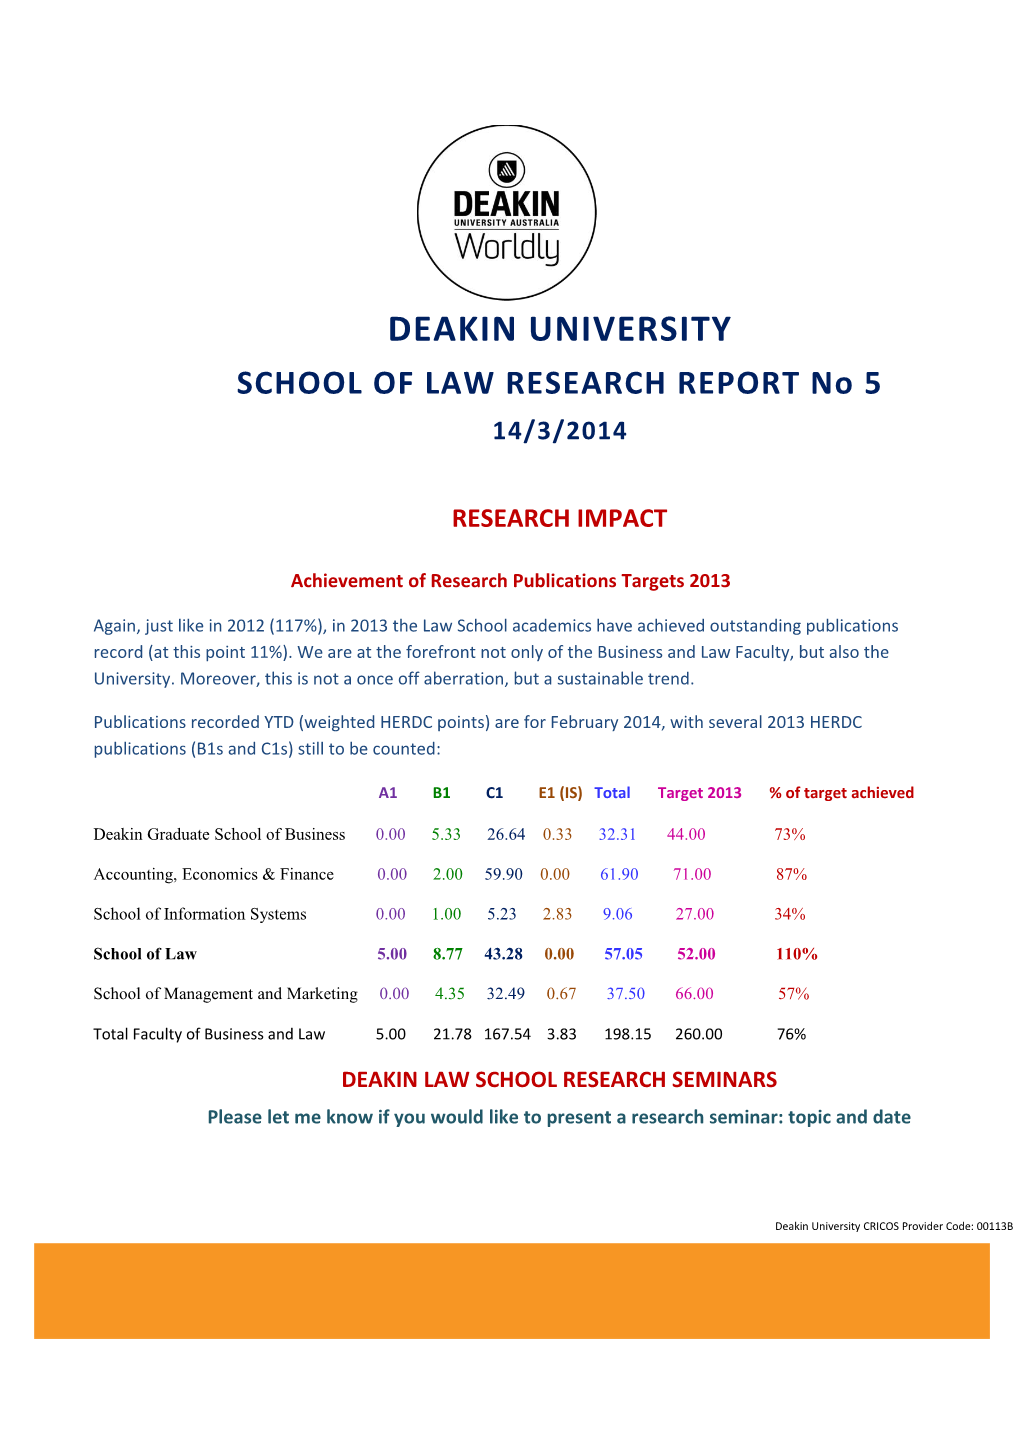 SCHOOL of LAW RESEARCH REPORT No 5